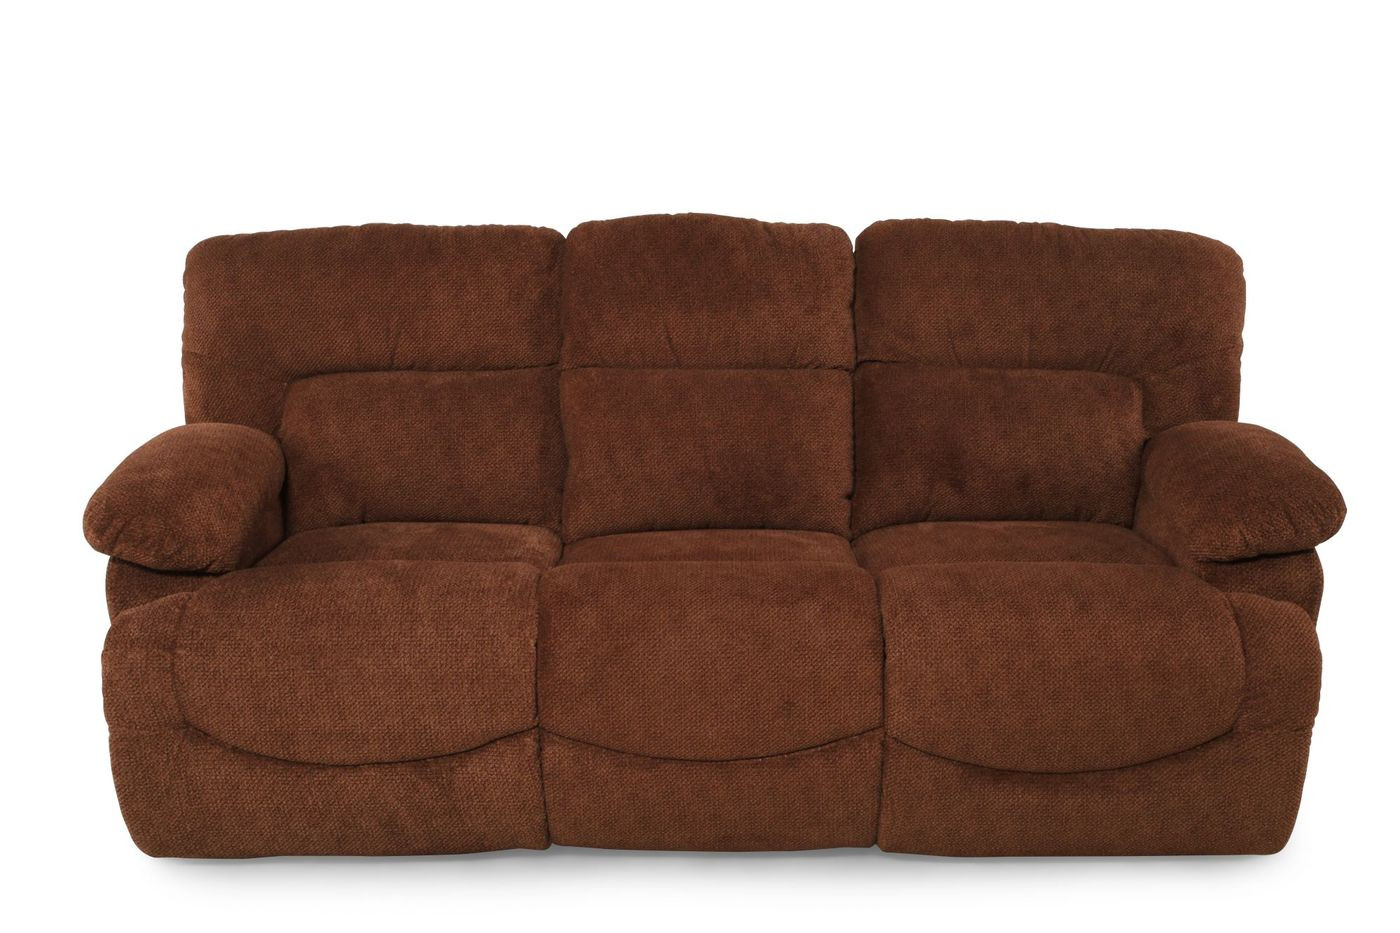 Best ideas about Lazy Boy Recliner Sofa
. Save or Pin La Z Boy Asher Caramel Recliner Sofa Now.